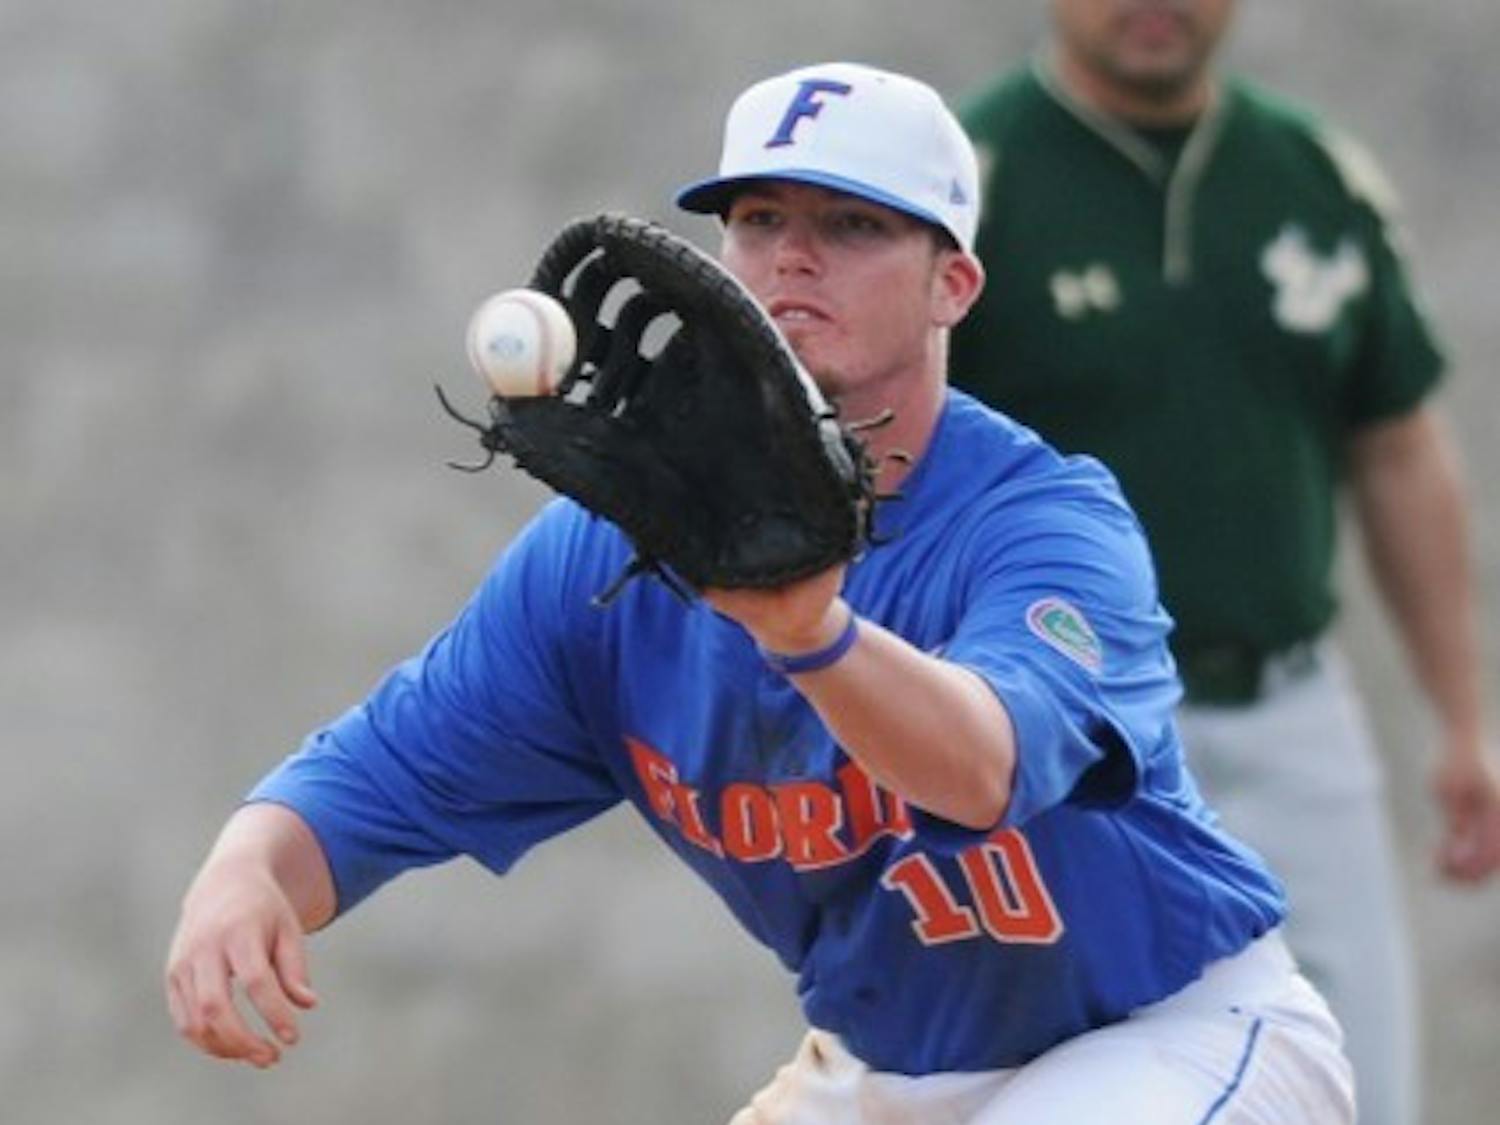 After hitting .333 and leading the team in home runs as a freshman, Florida first baseman and relief pitcher Austin Maddox slumped to hit .280 as a sophomore.